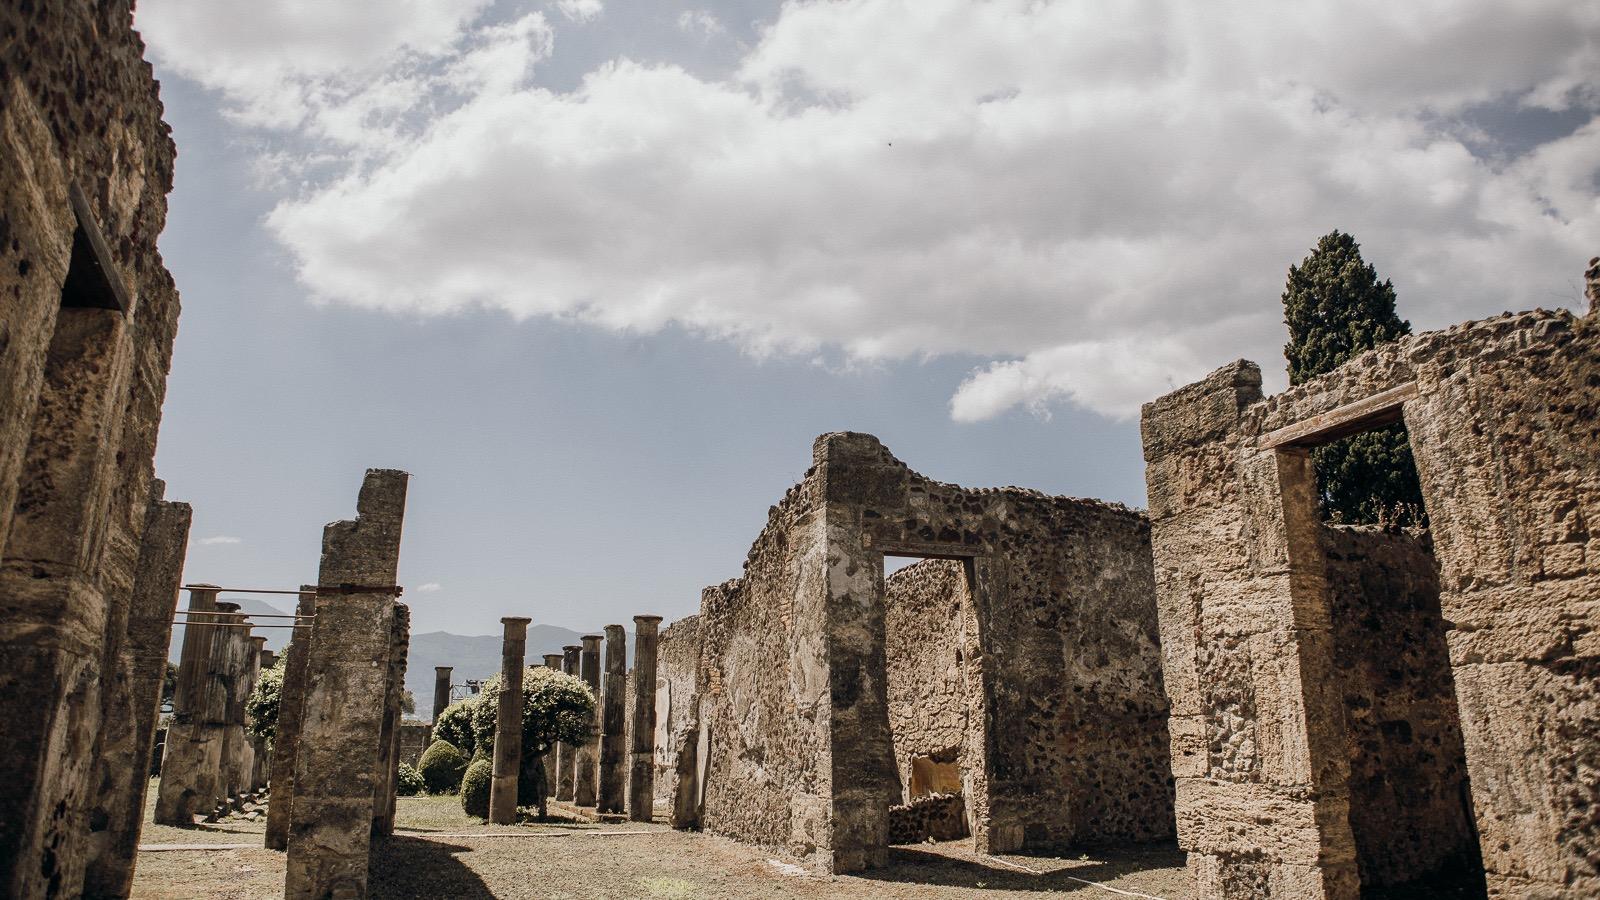 Pompeii Tours from Rome with lunch on the Amalfi Coast